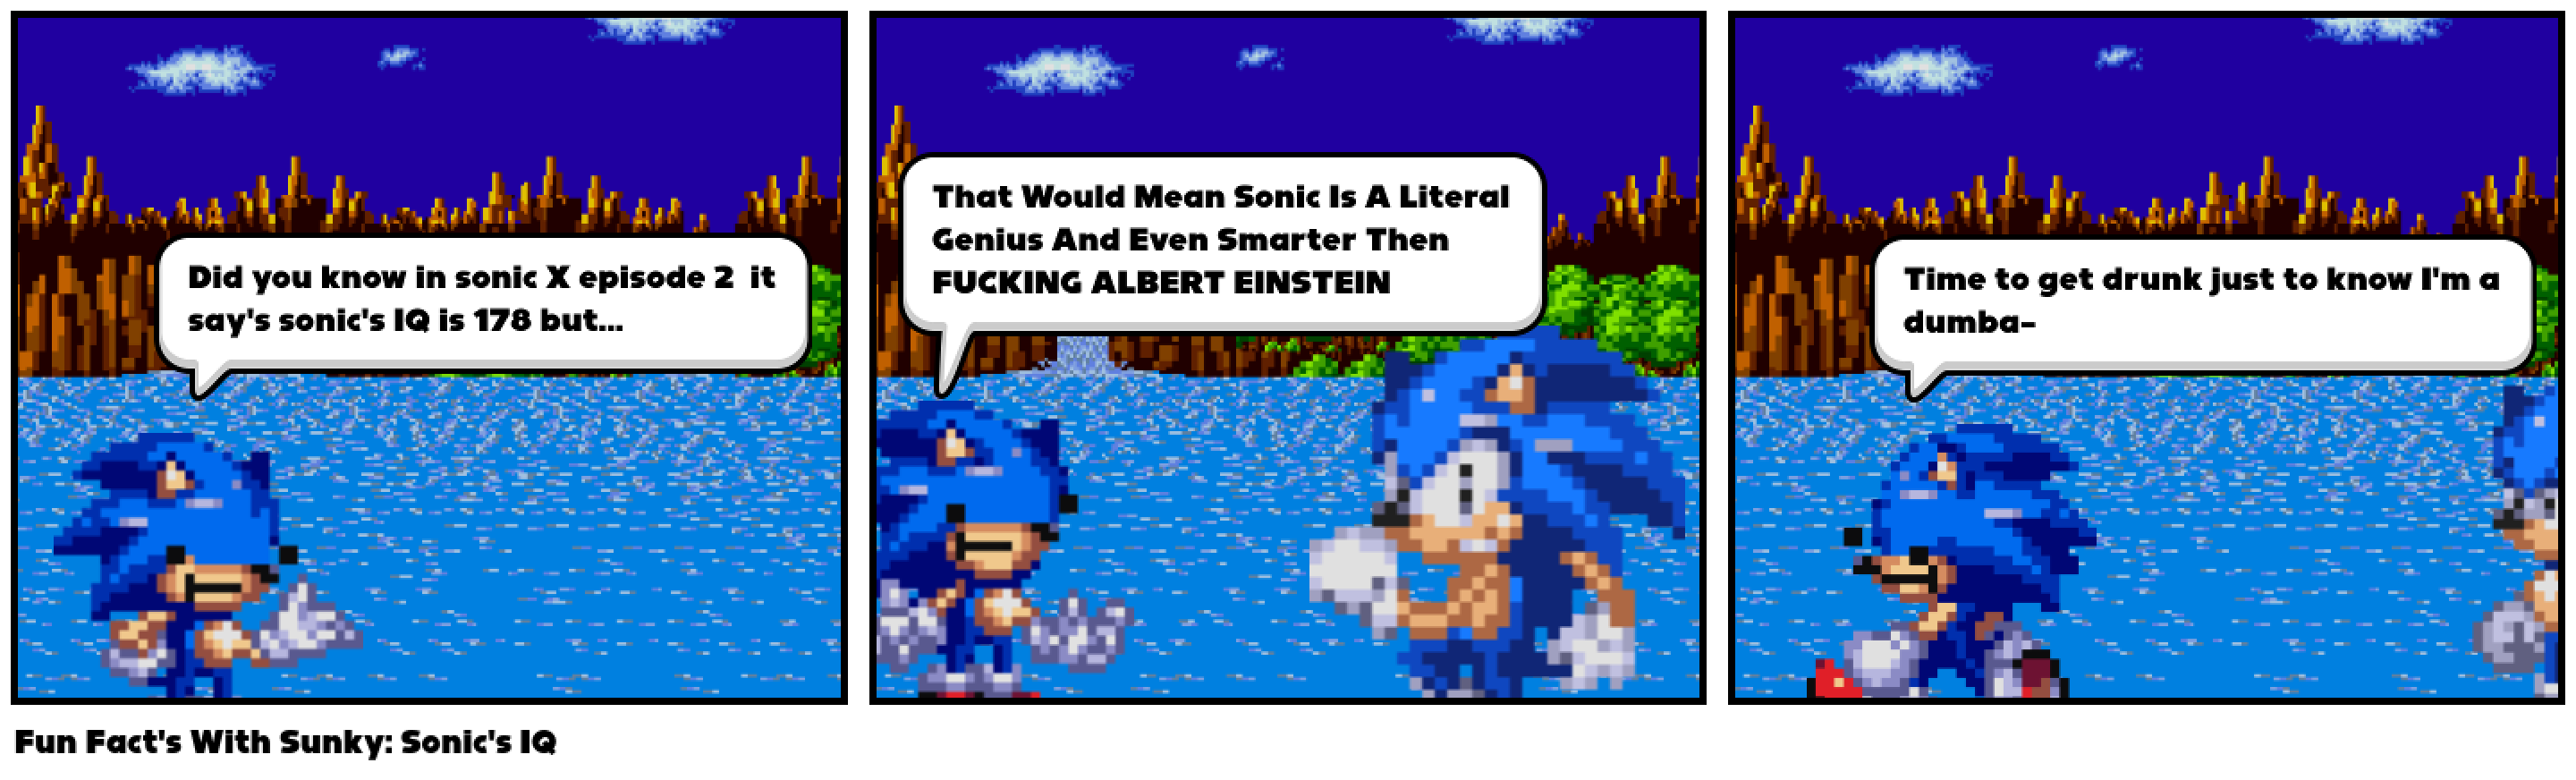 Fun Fact's With Sunky: Sonic's IQ